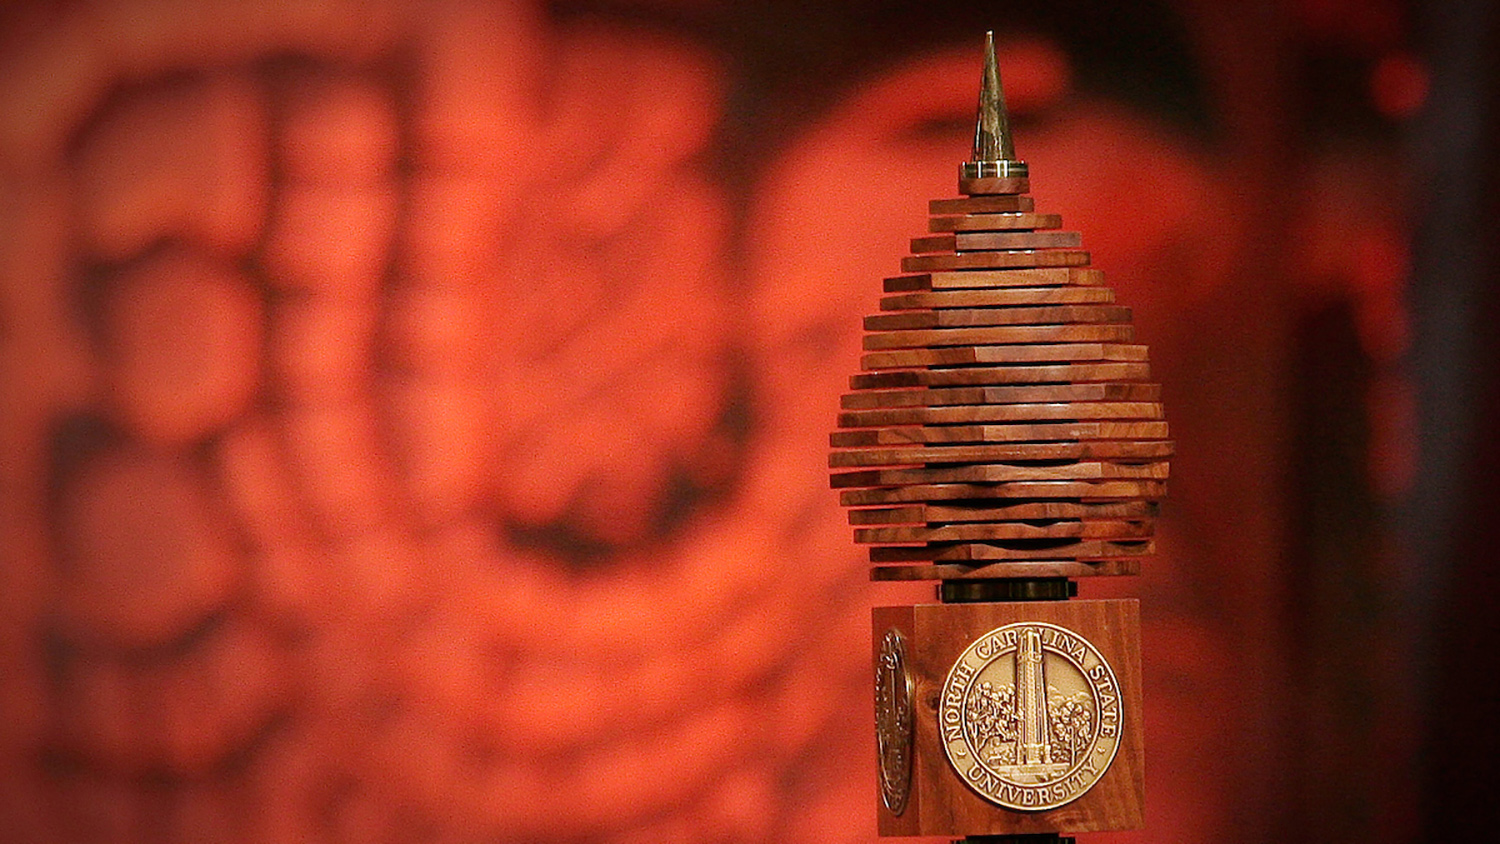 A detail of the university mace during the Chancellor's installation